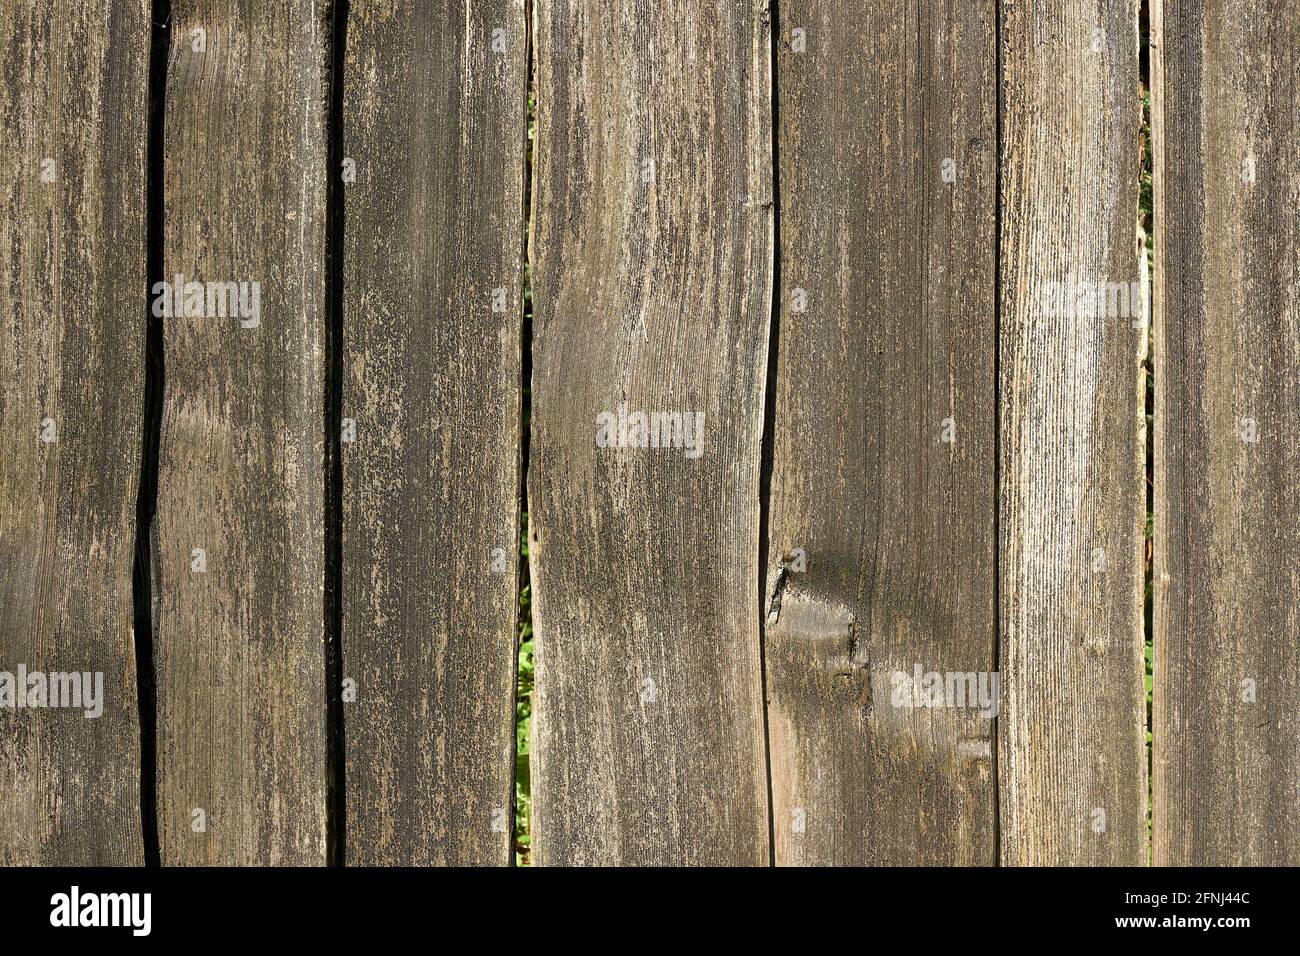 Closeup of wooden fence made of rough wood planks Stock Photo